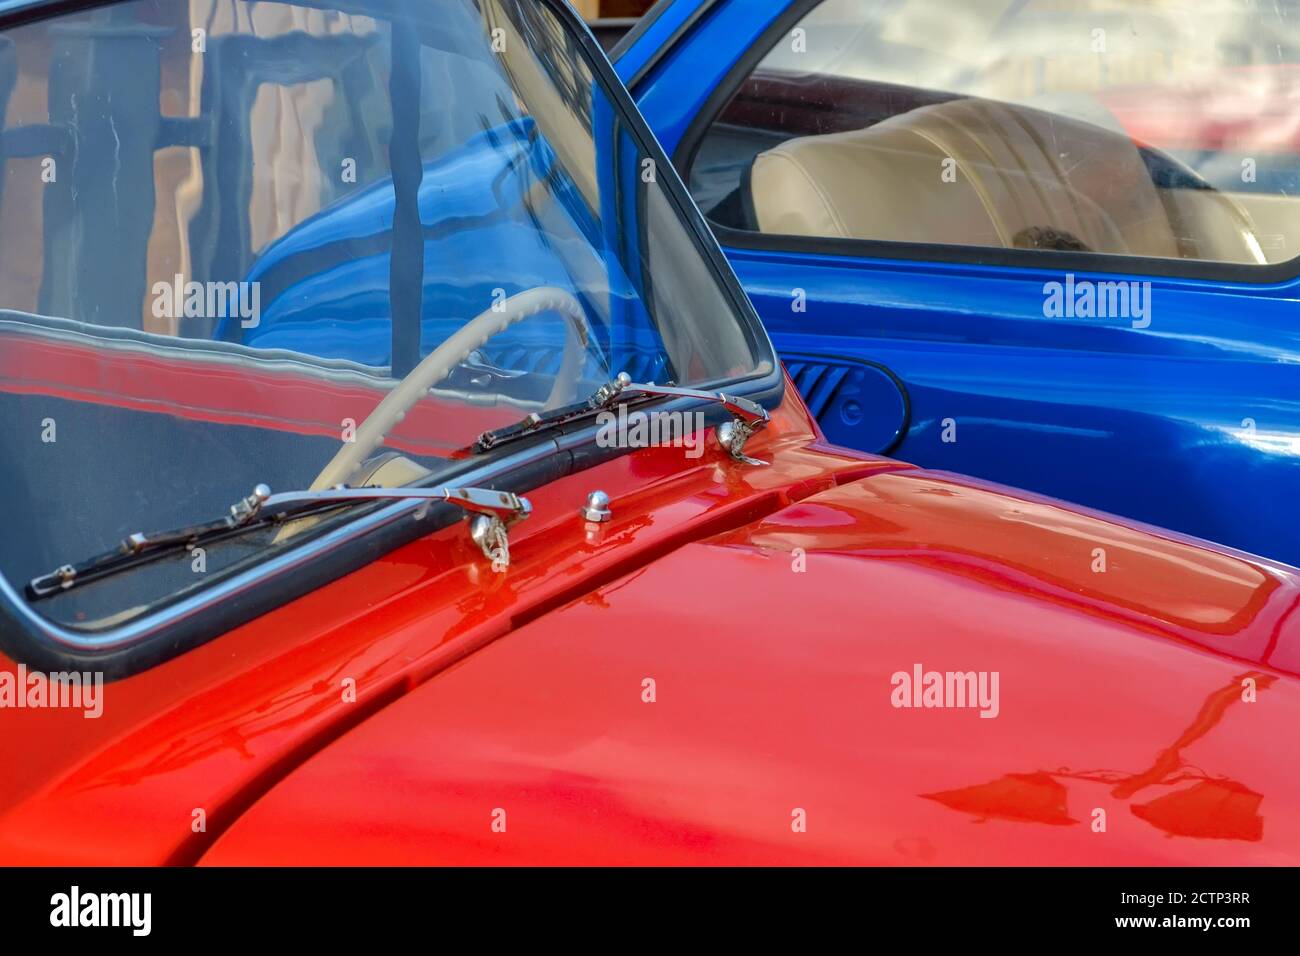 Car hood and windshield of a red car on the background of a blue car close-up. Stock Photo